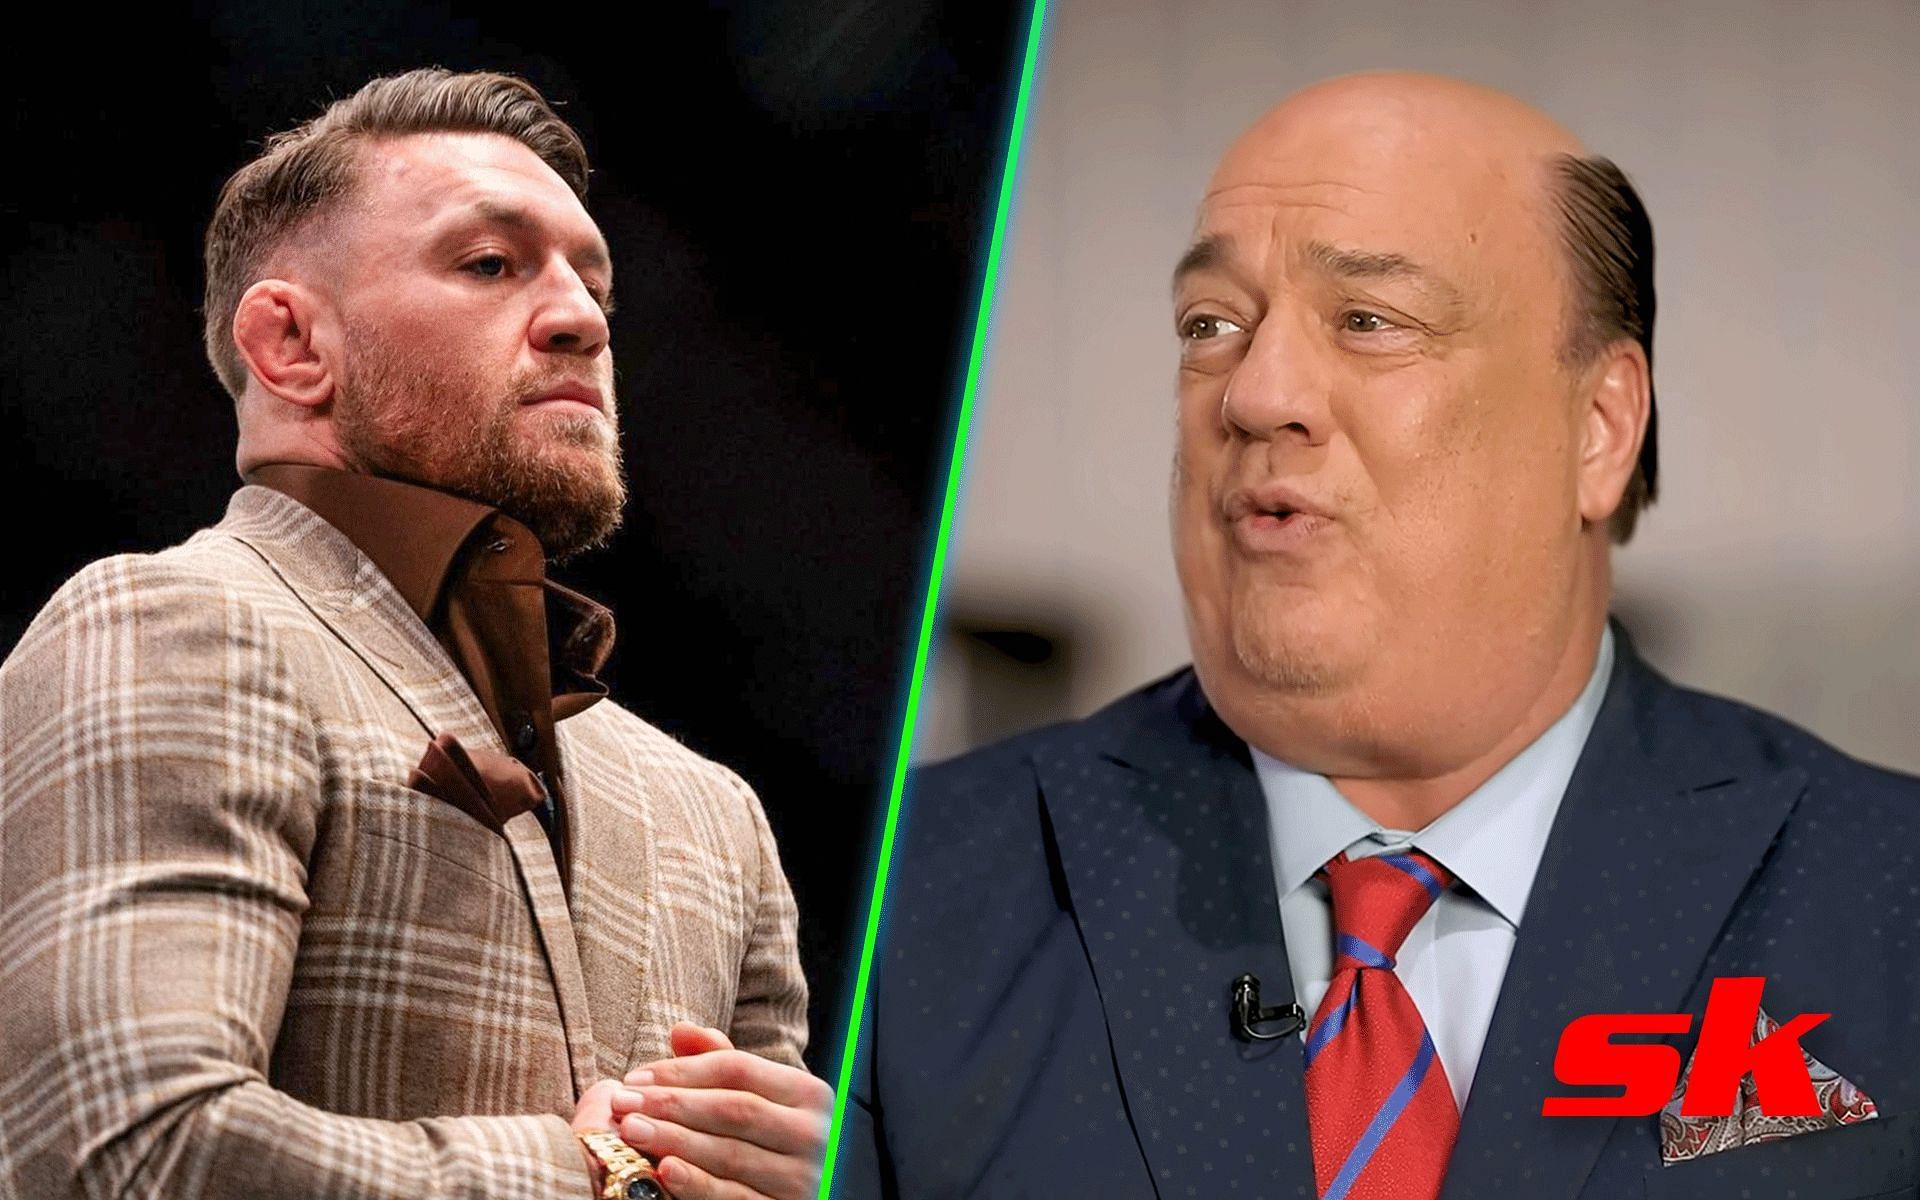 Conor McGregor (Left) and Paul Heyman (Right) [Images via: @thenotoriousmma on Instagram and BT Sport on YouTube]